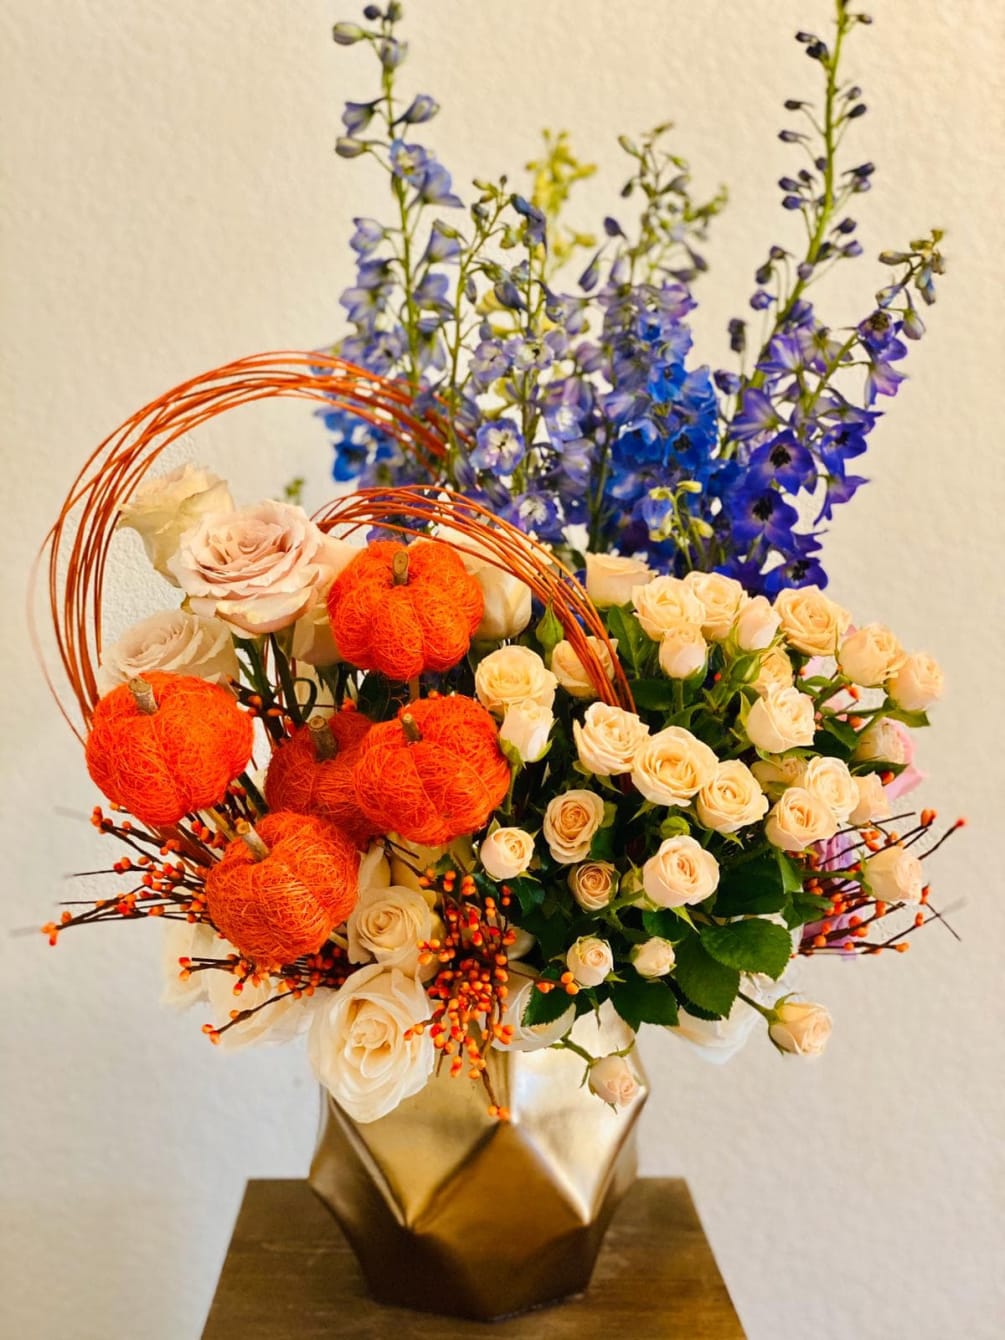 A breathtaking array of muted peach roses, spray roses, blue larkspurs, and